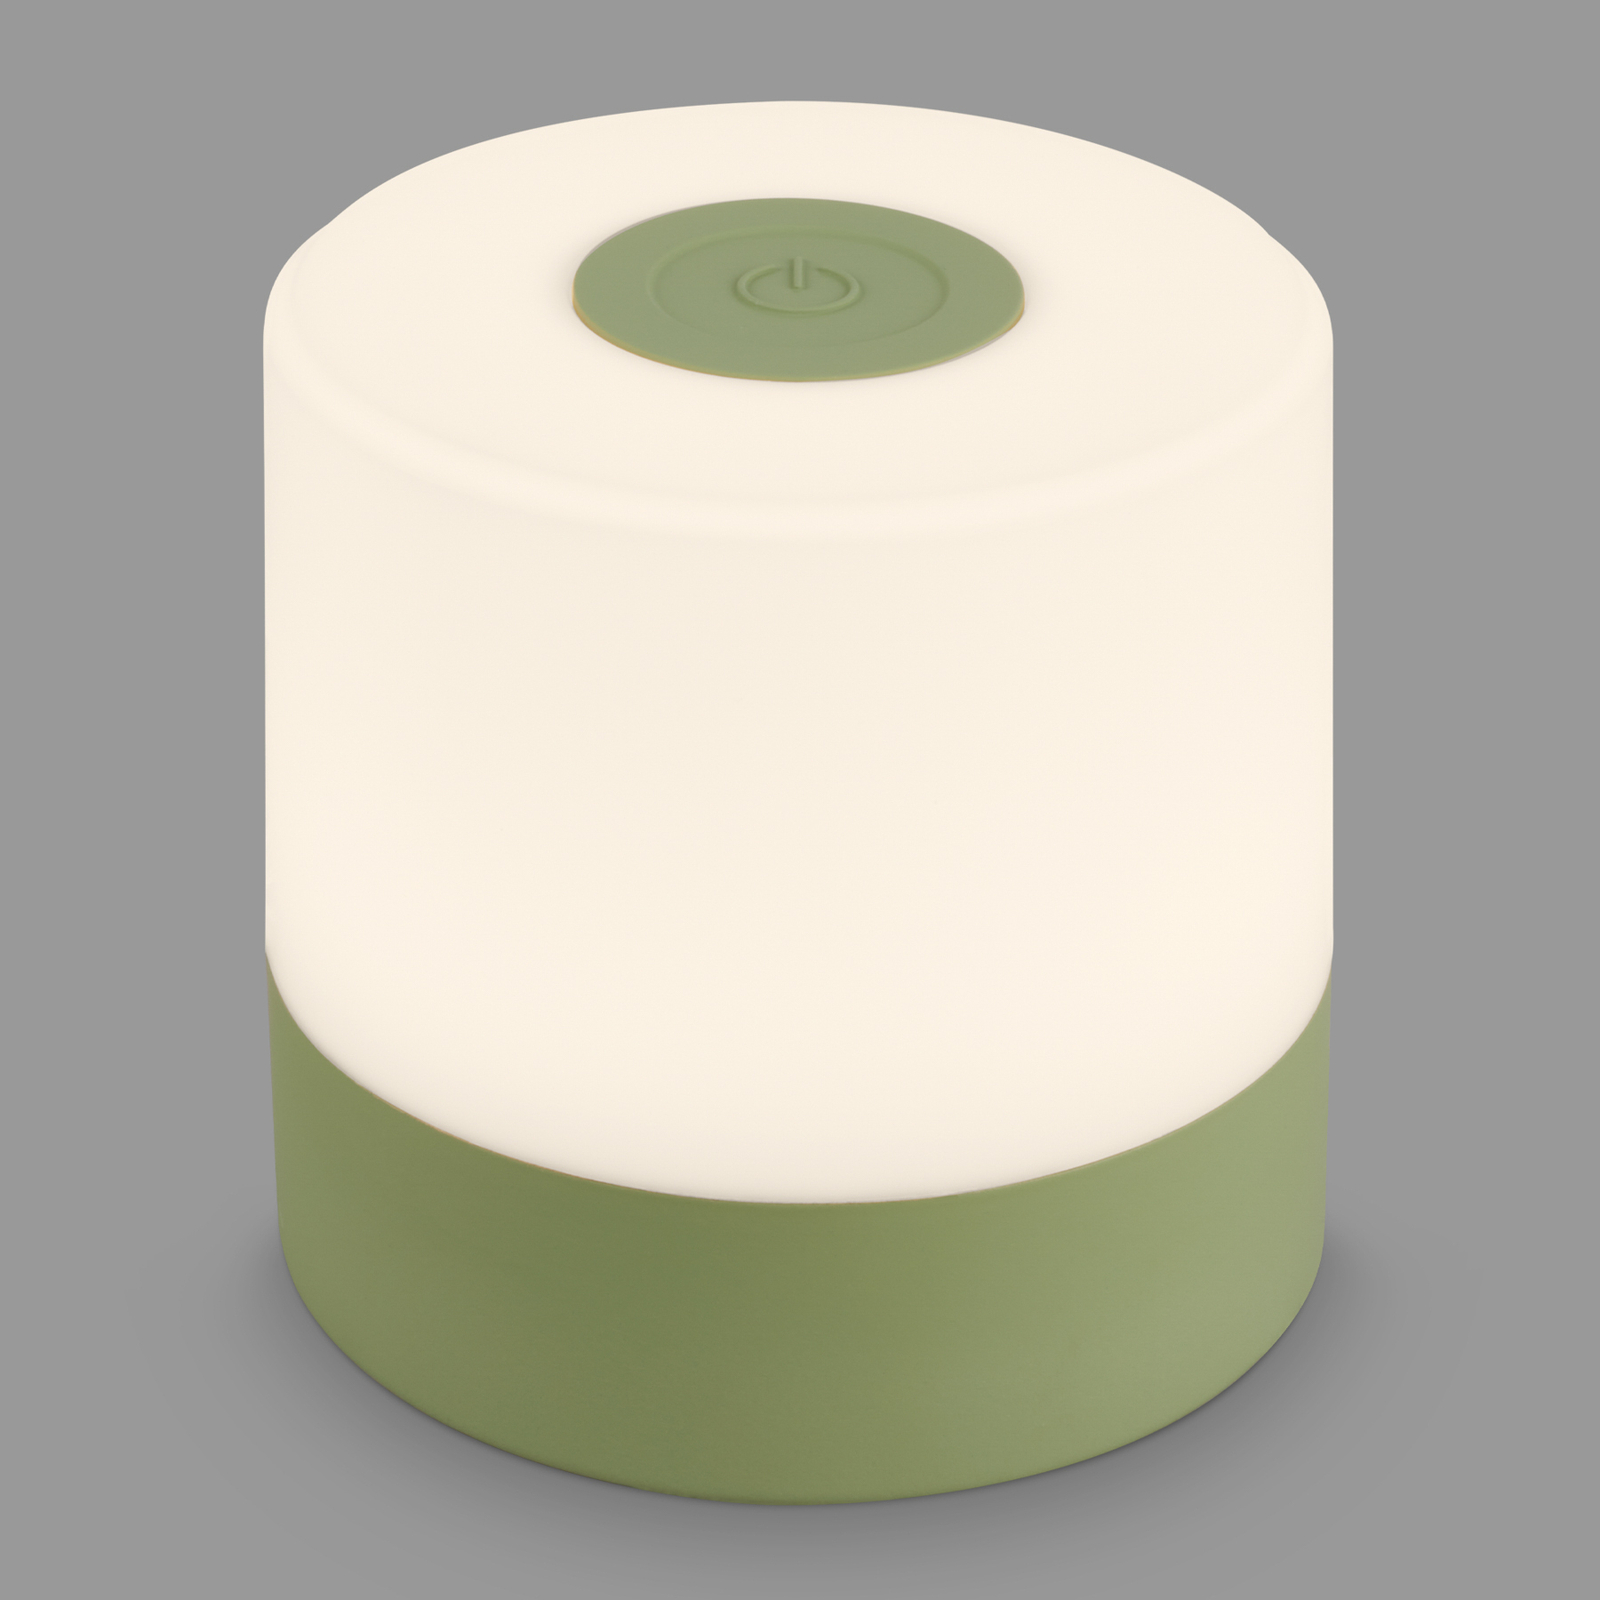 LED table lamp Smal, rechargeable battery, 2,700 K, green